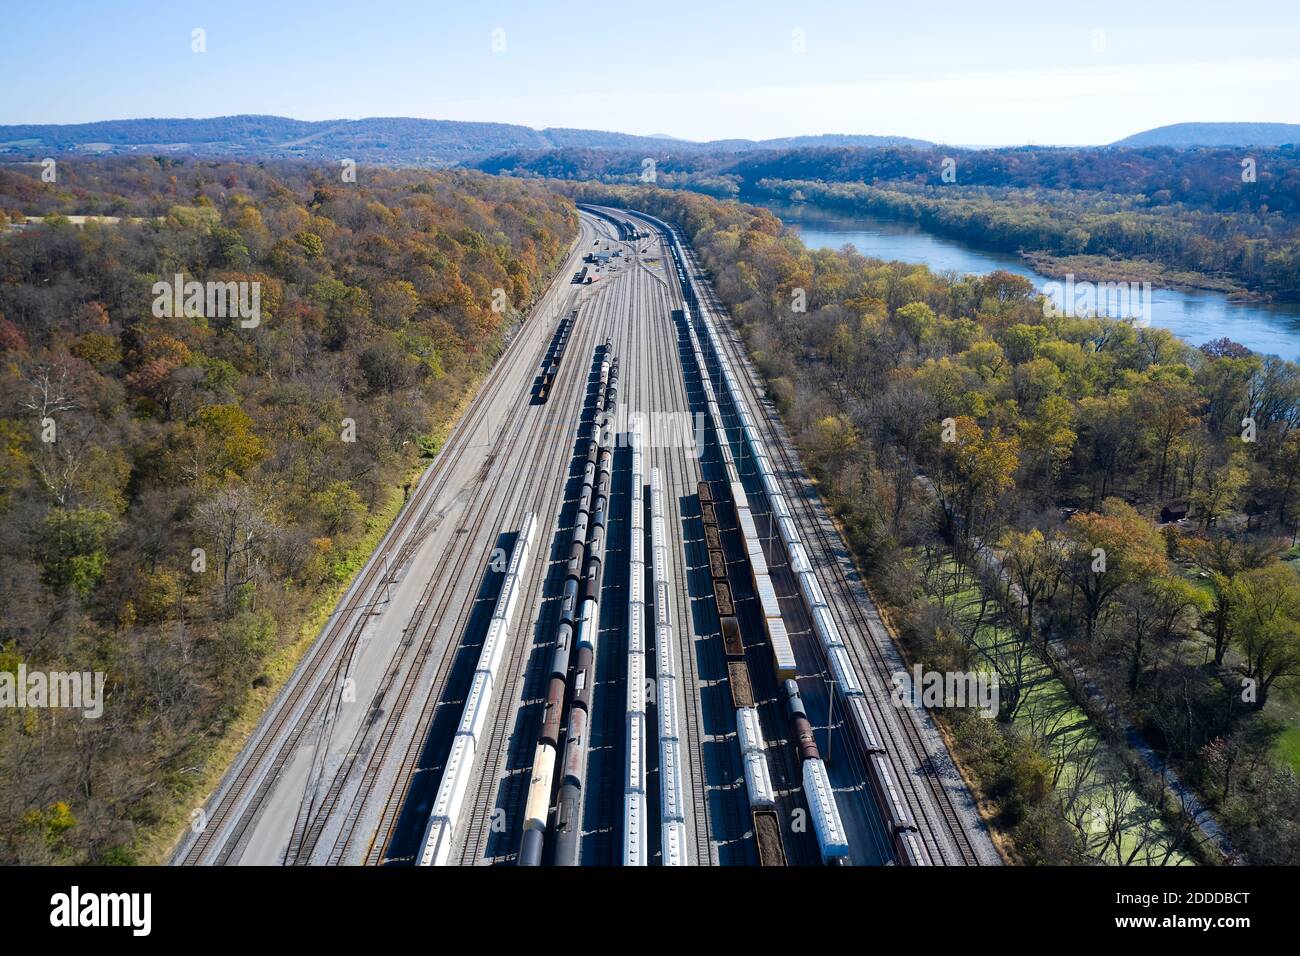 Aerial view of railroad cars waiting on tracks stretching along Chesapeake and Ohio Canal Stock Photo